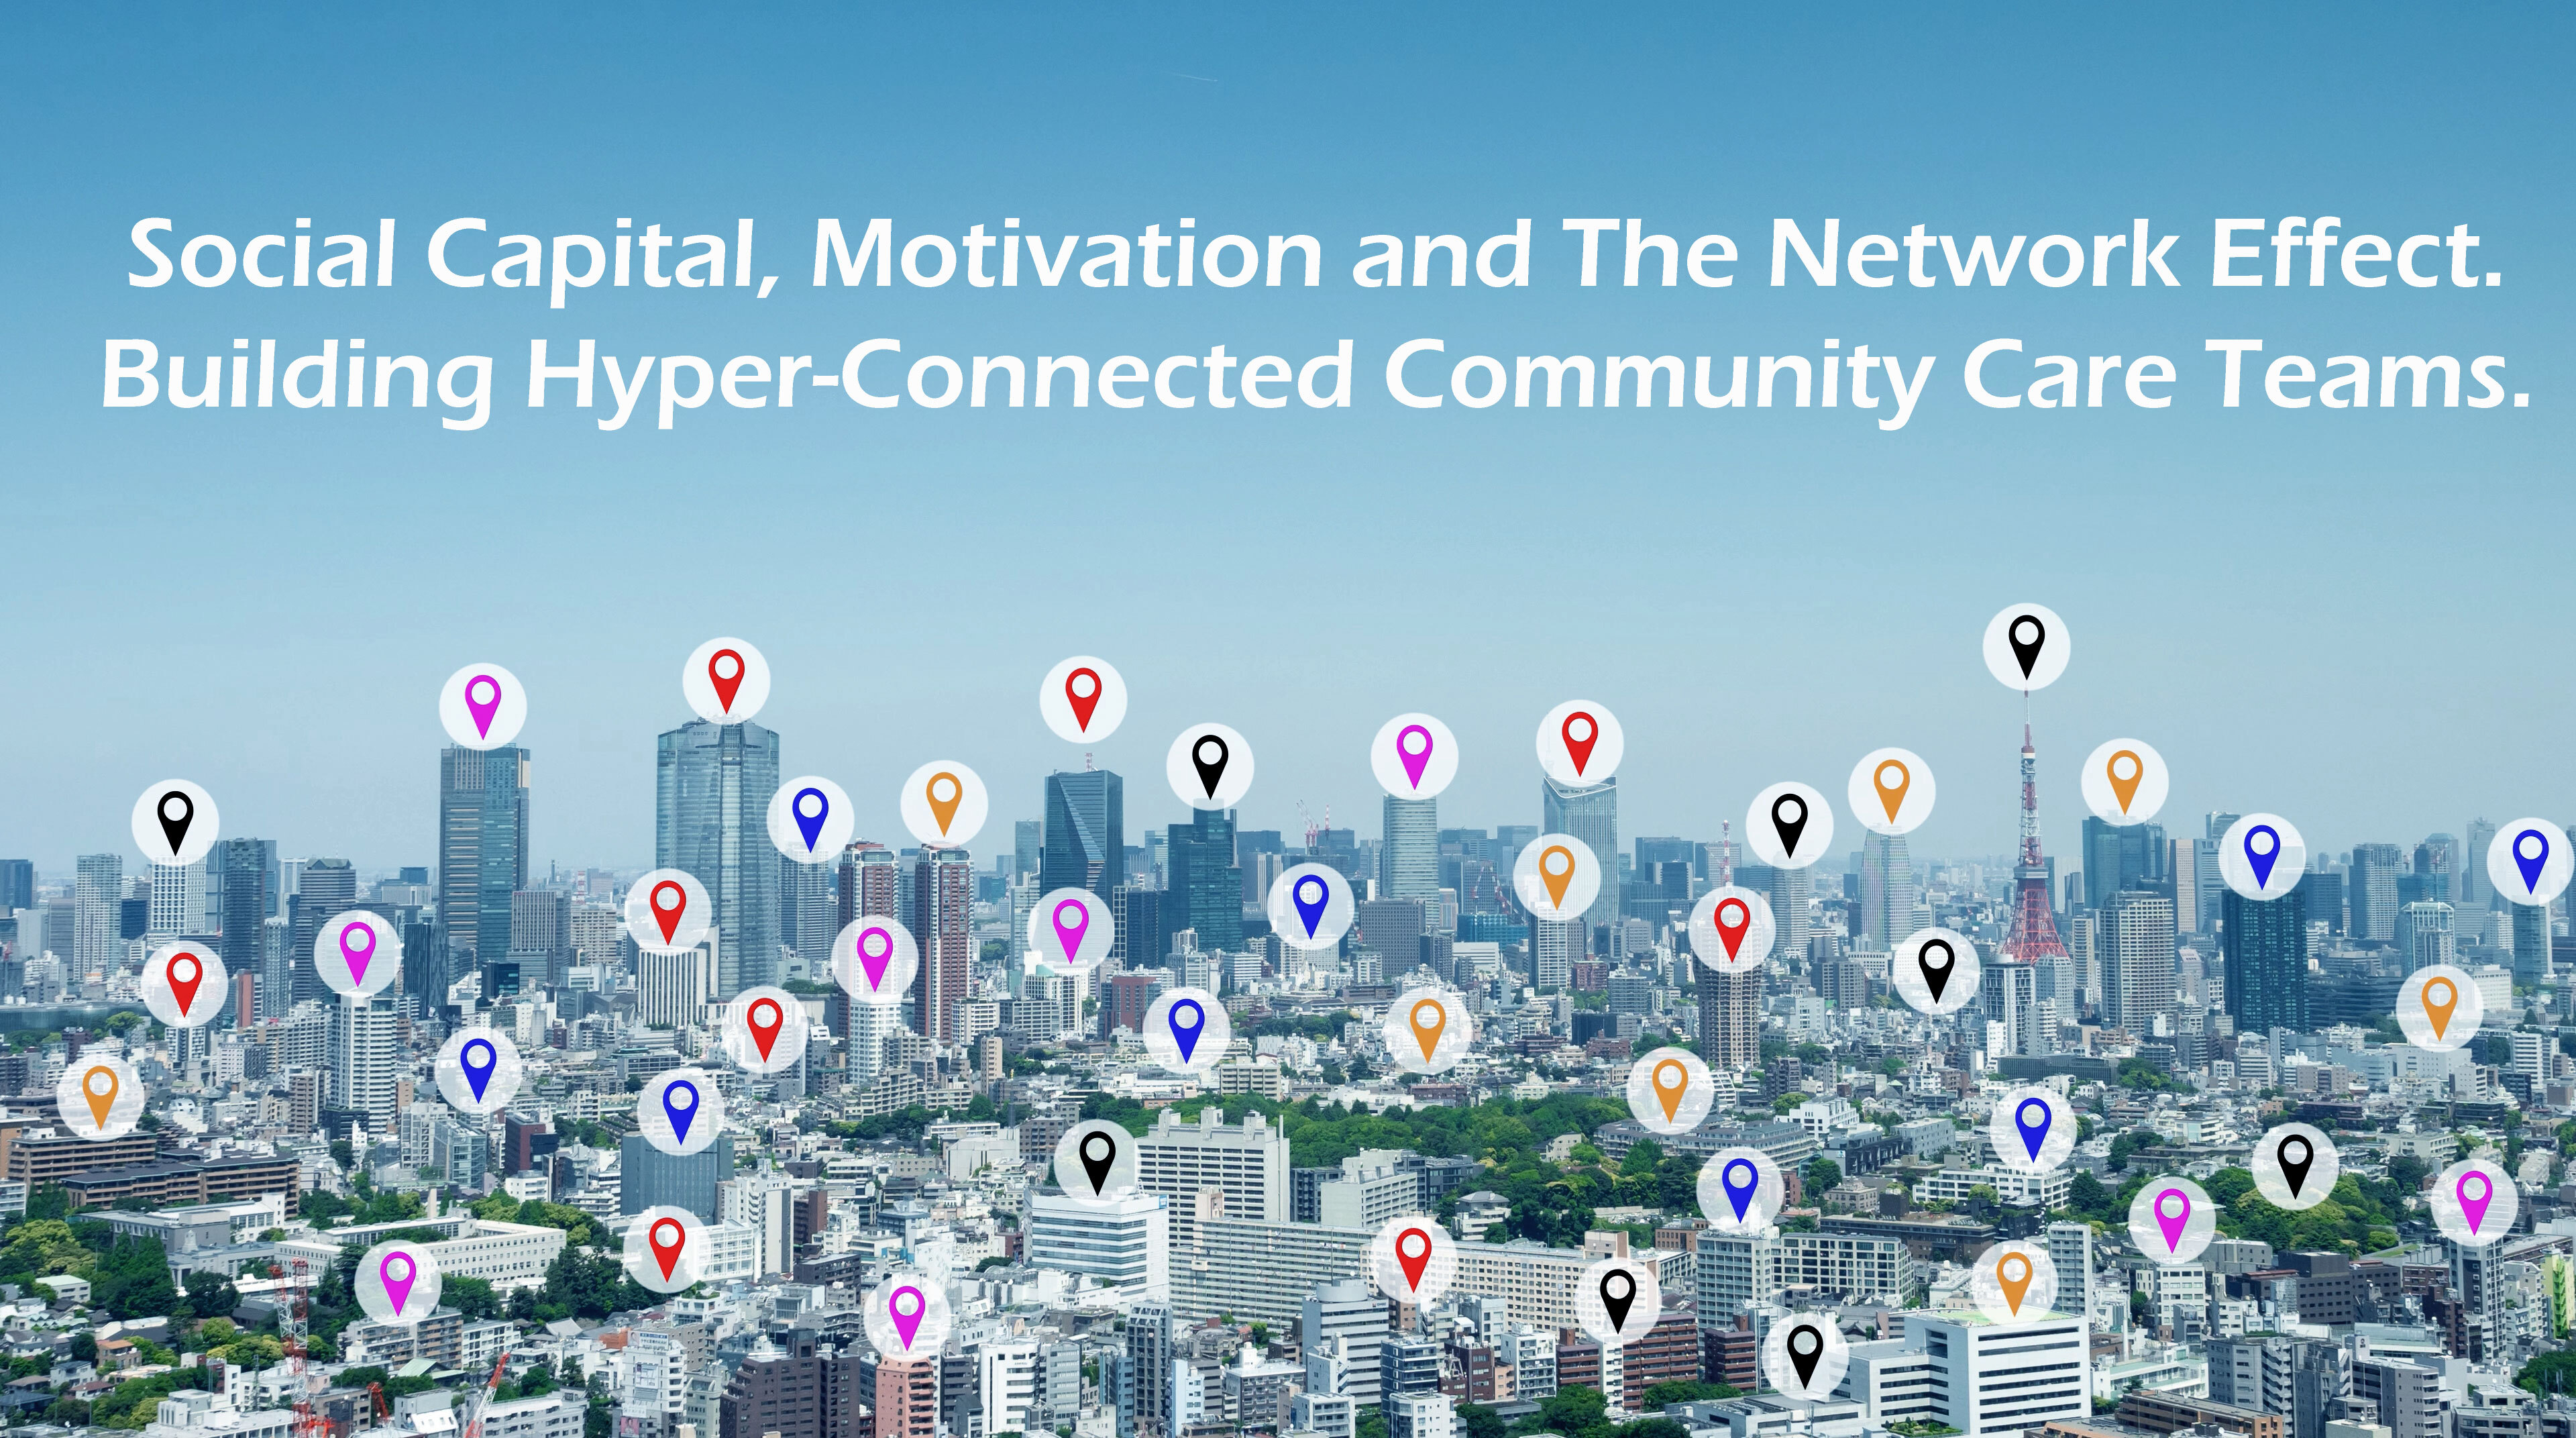 Social Capital and its Network Effect Making Healthcare Work Better